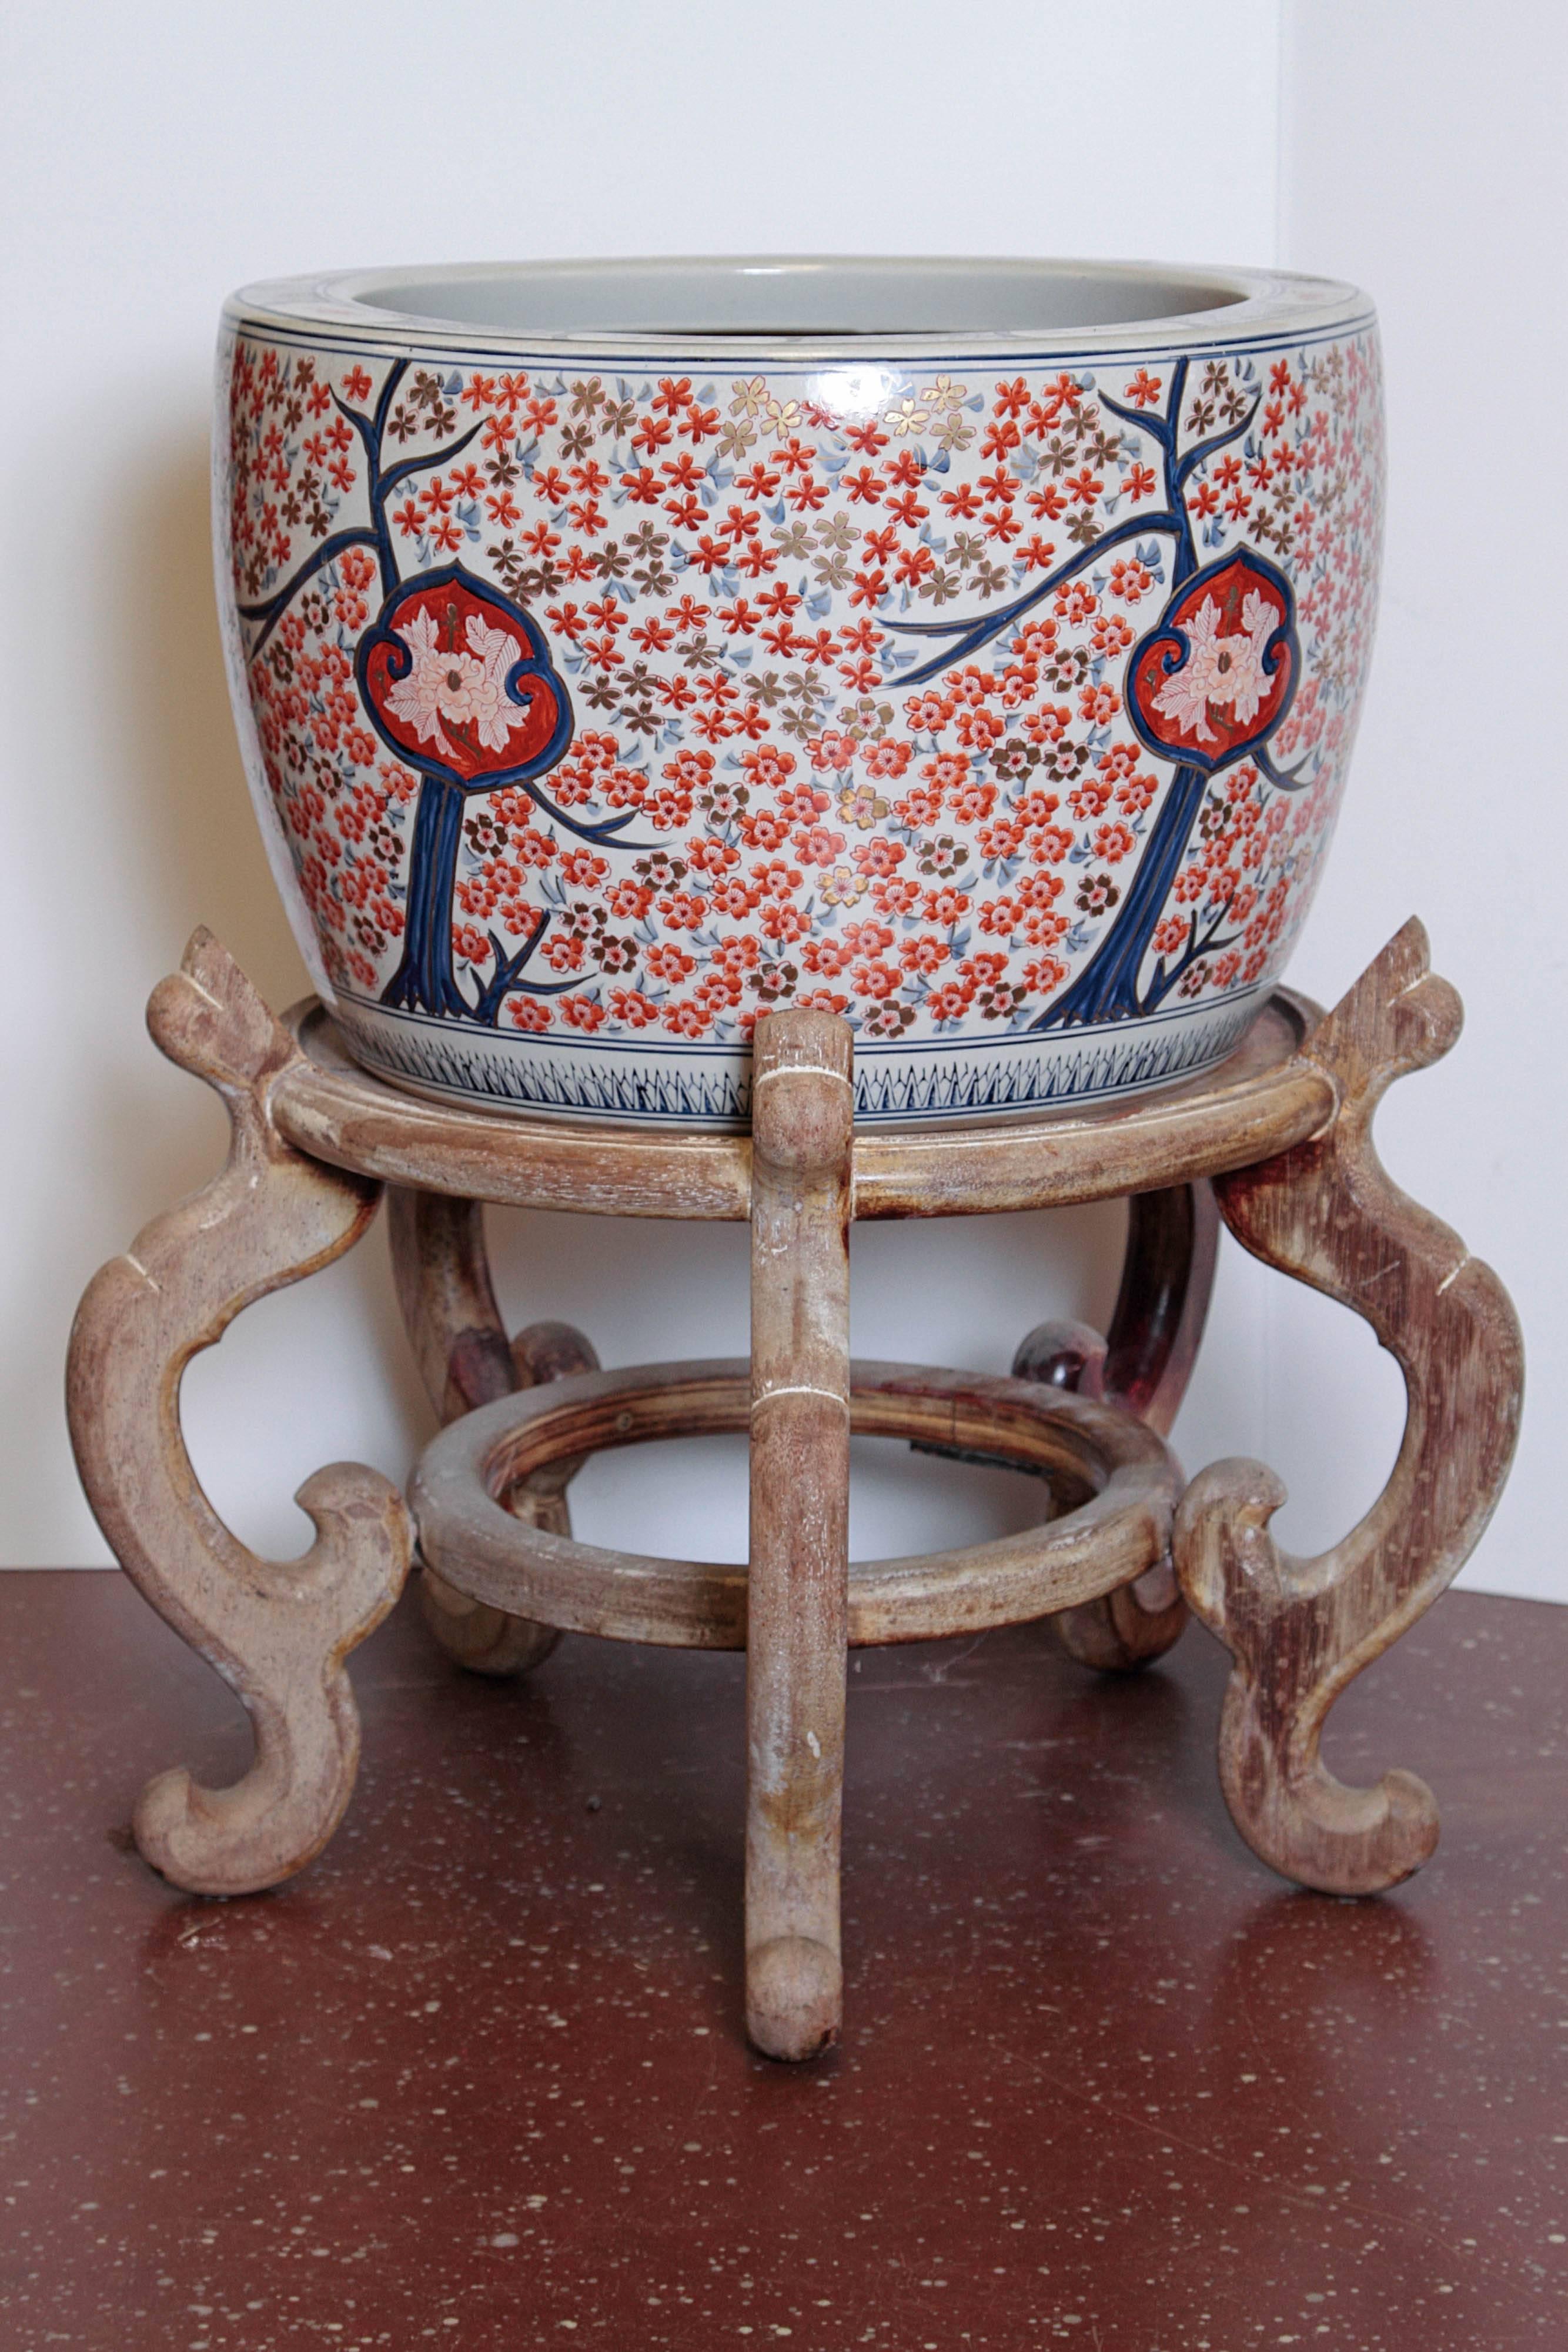 Asian planter on stand in Imari colors. Unfinished inside and drilled with three holes for drainage.